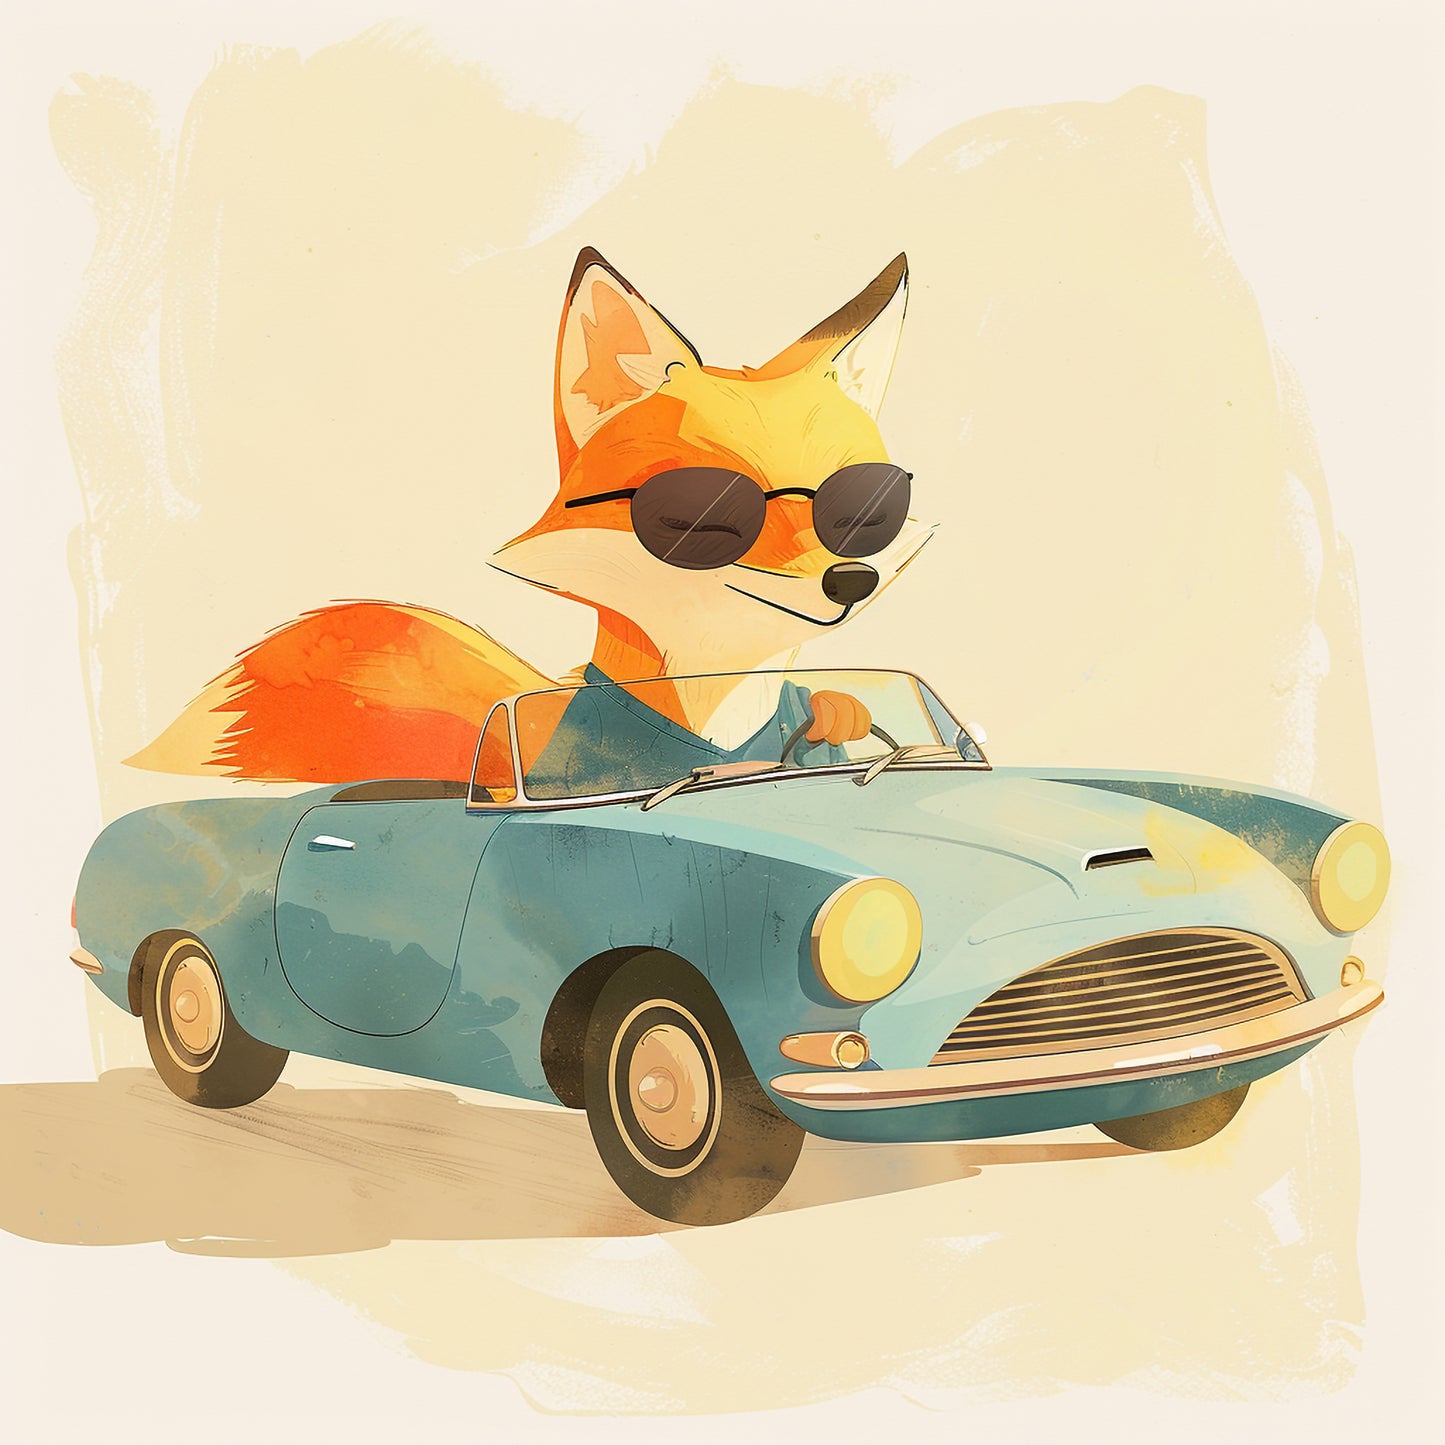 Stylish Fox in Sunglasses Driving a Vintage Convertible